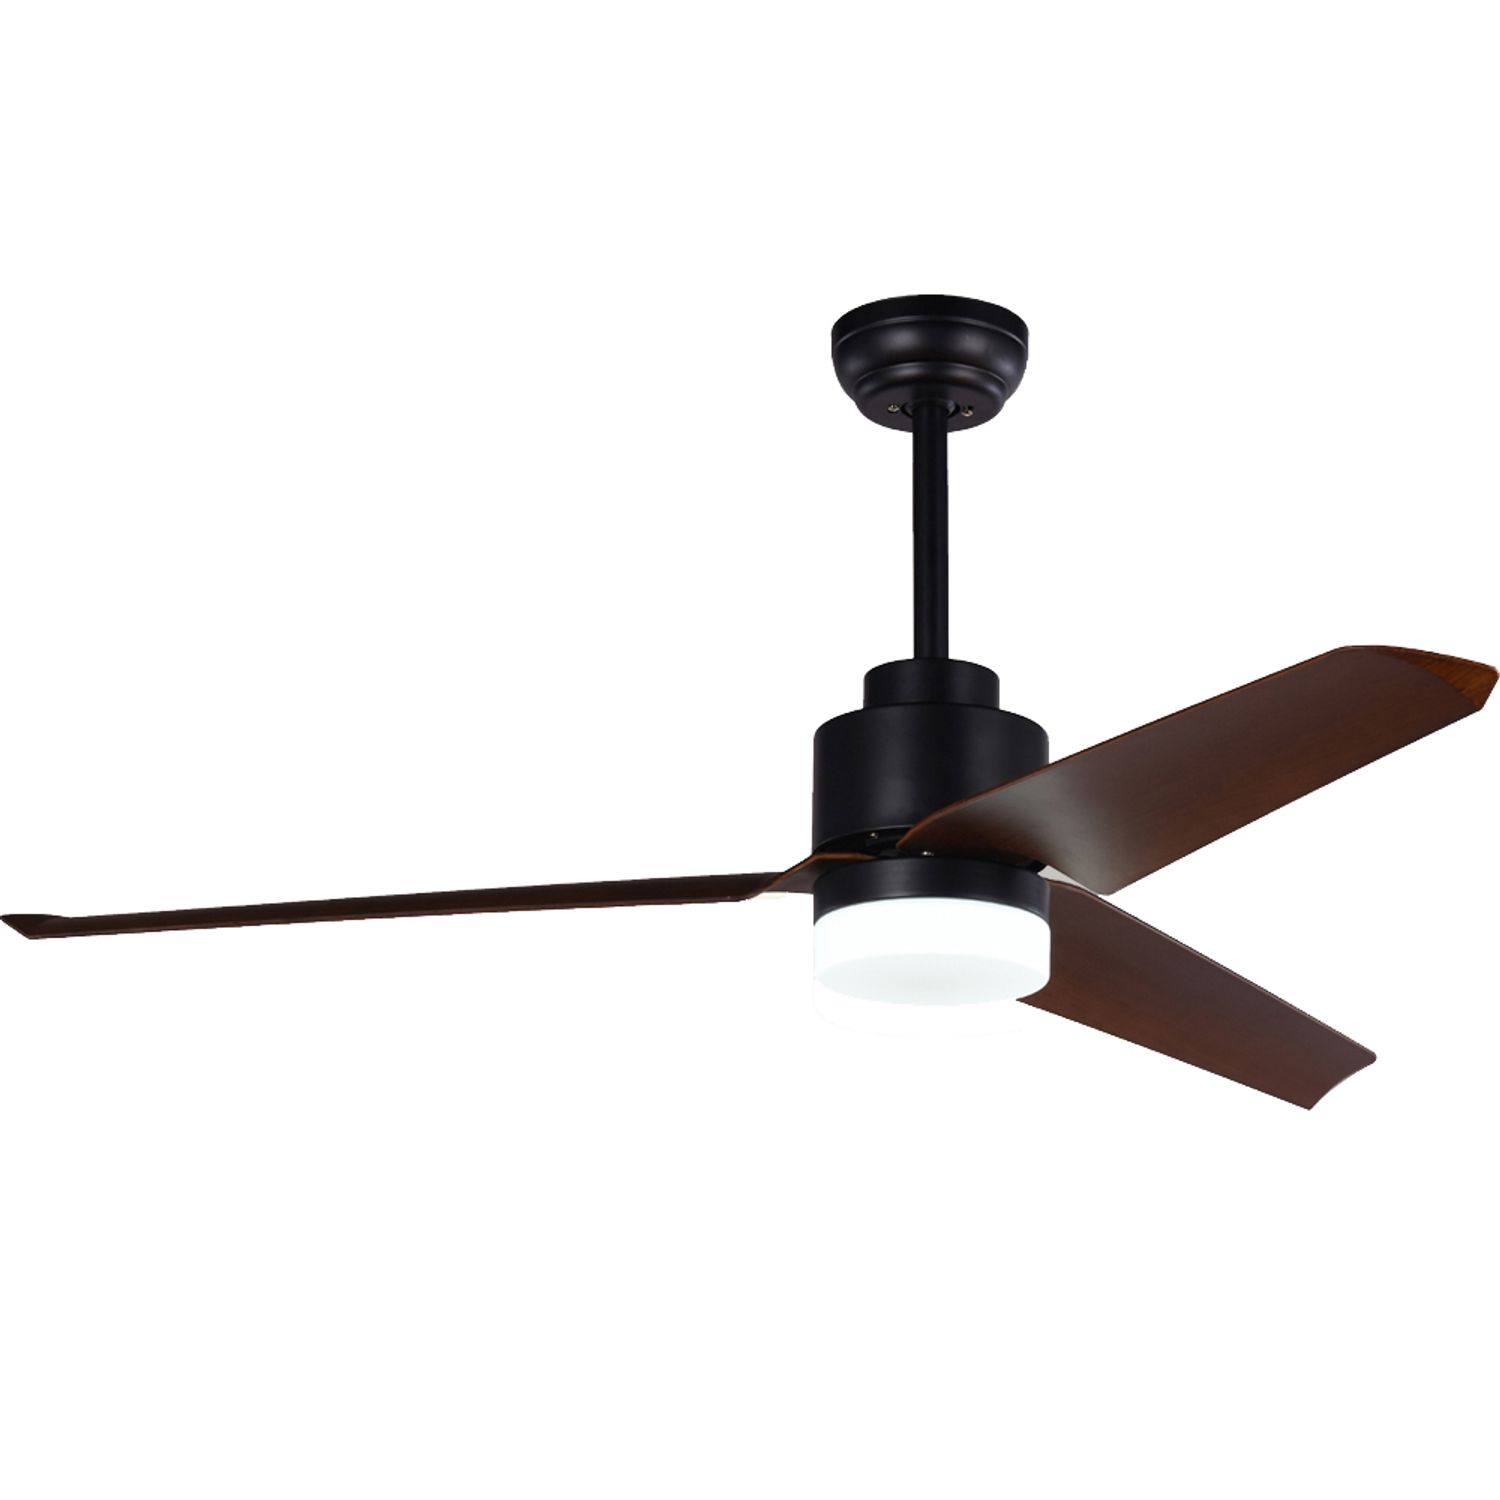 KBS 51 inch ABS Dual Mount Noiseless Ceiling Fan with LED Light